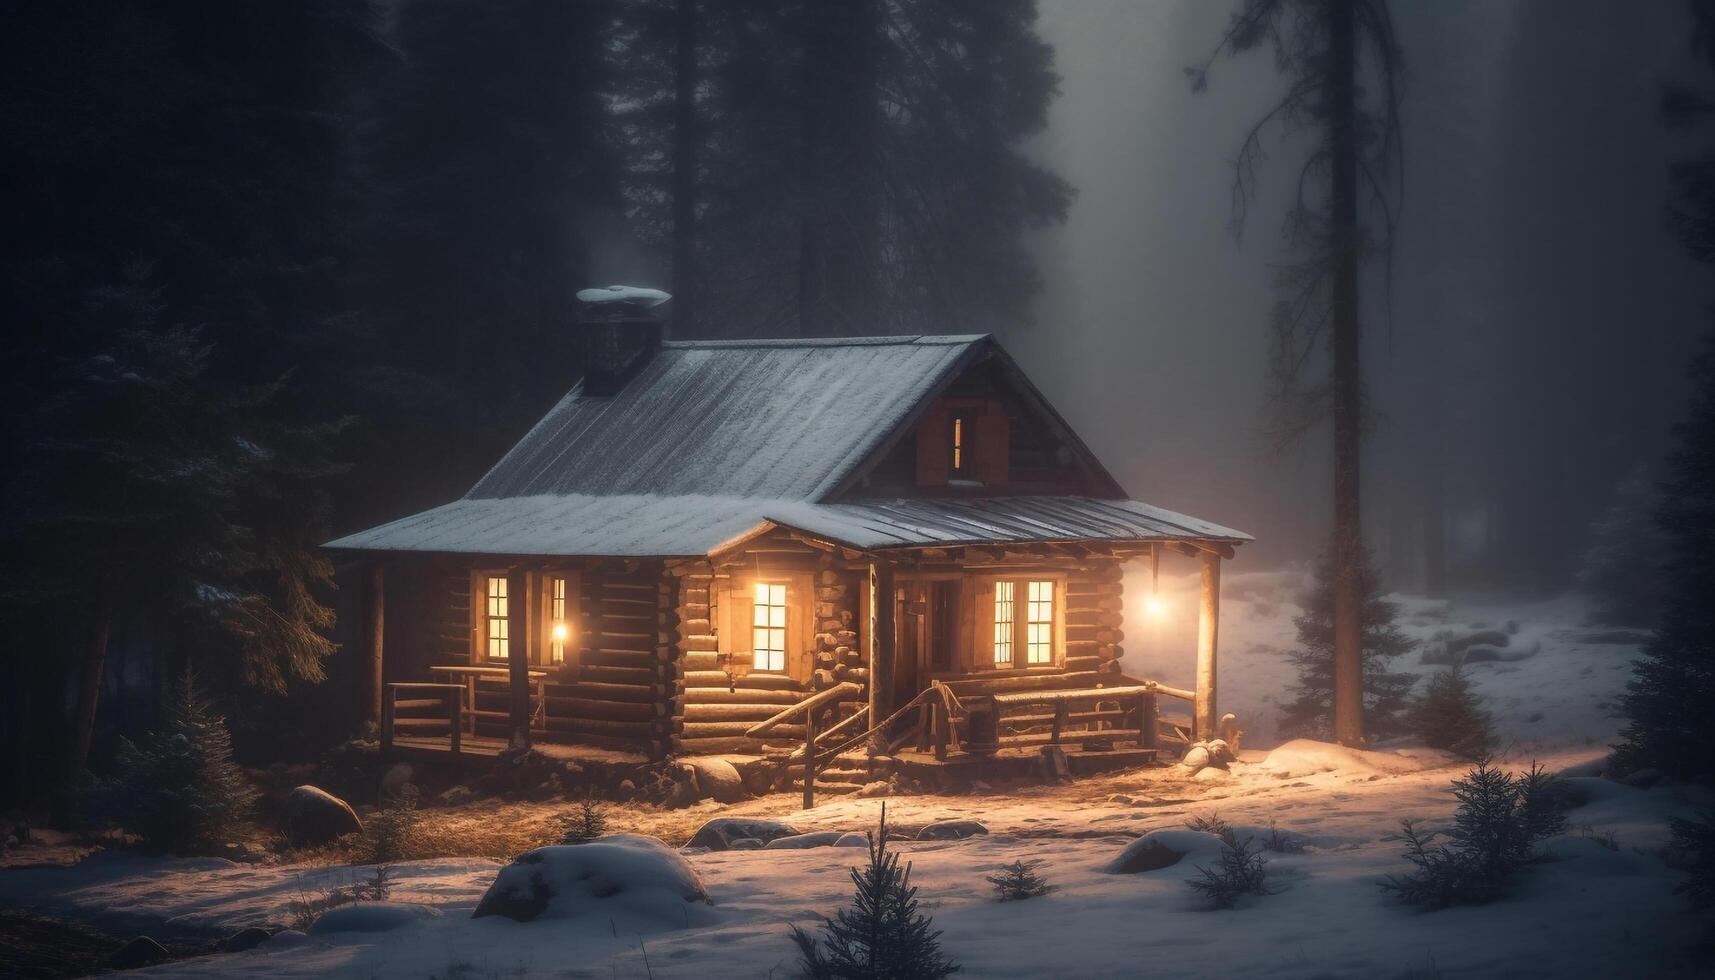 In the dark winter night, the spooky old hut illuminates generated by AI photo